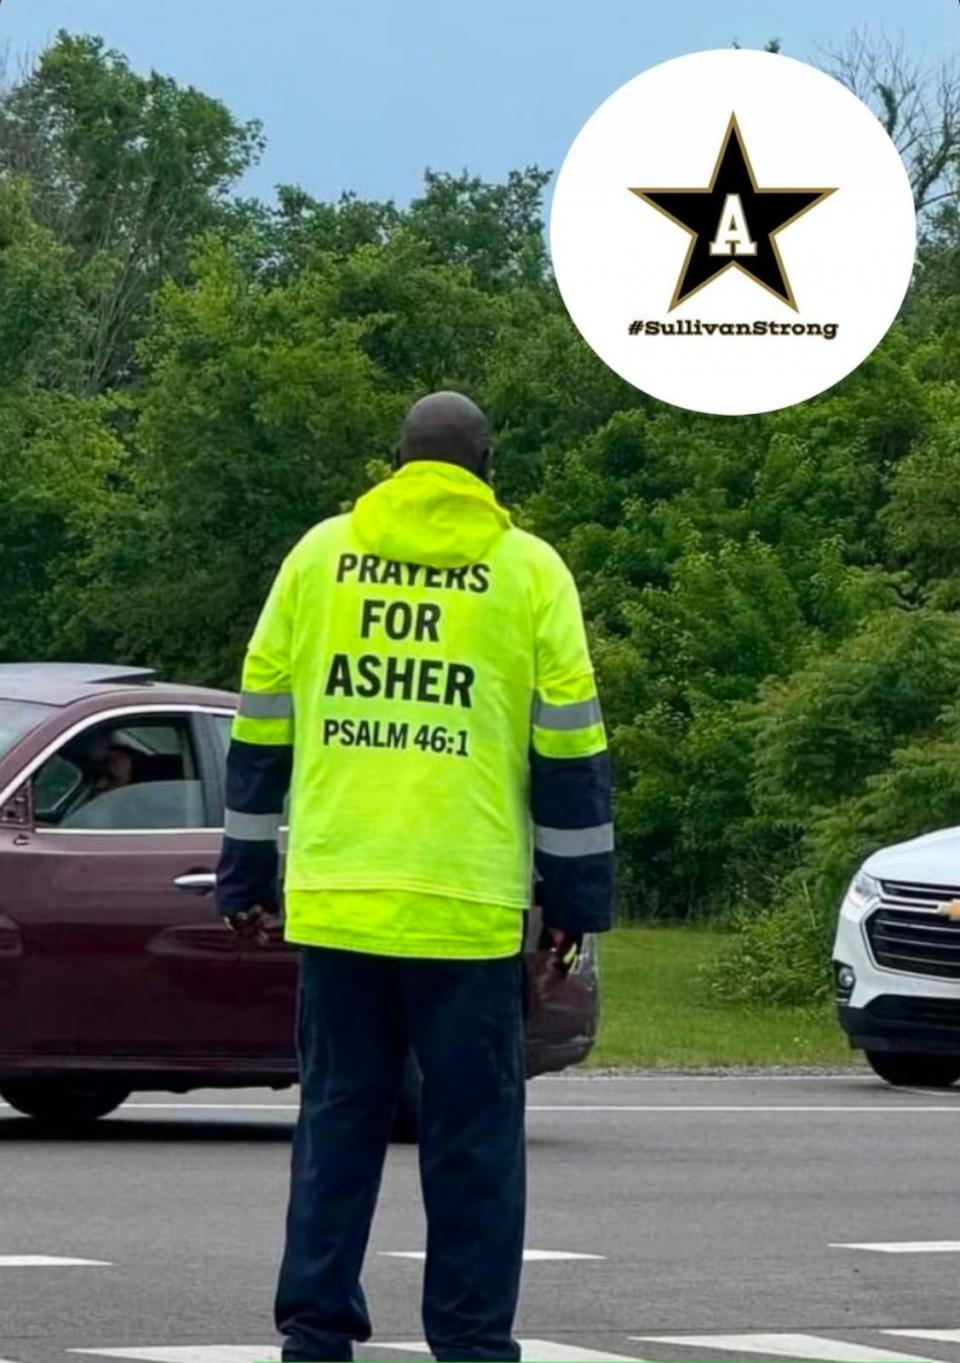 PHOTO: Members of the Rutherford County Schools district are rallying around Asher Sullivan, a 10-year-old boy who was swept away in a storm drain. (Courtesy of Rutherford County Schools)